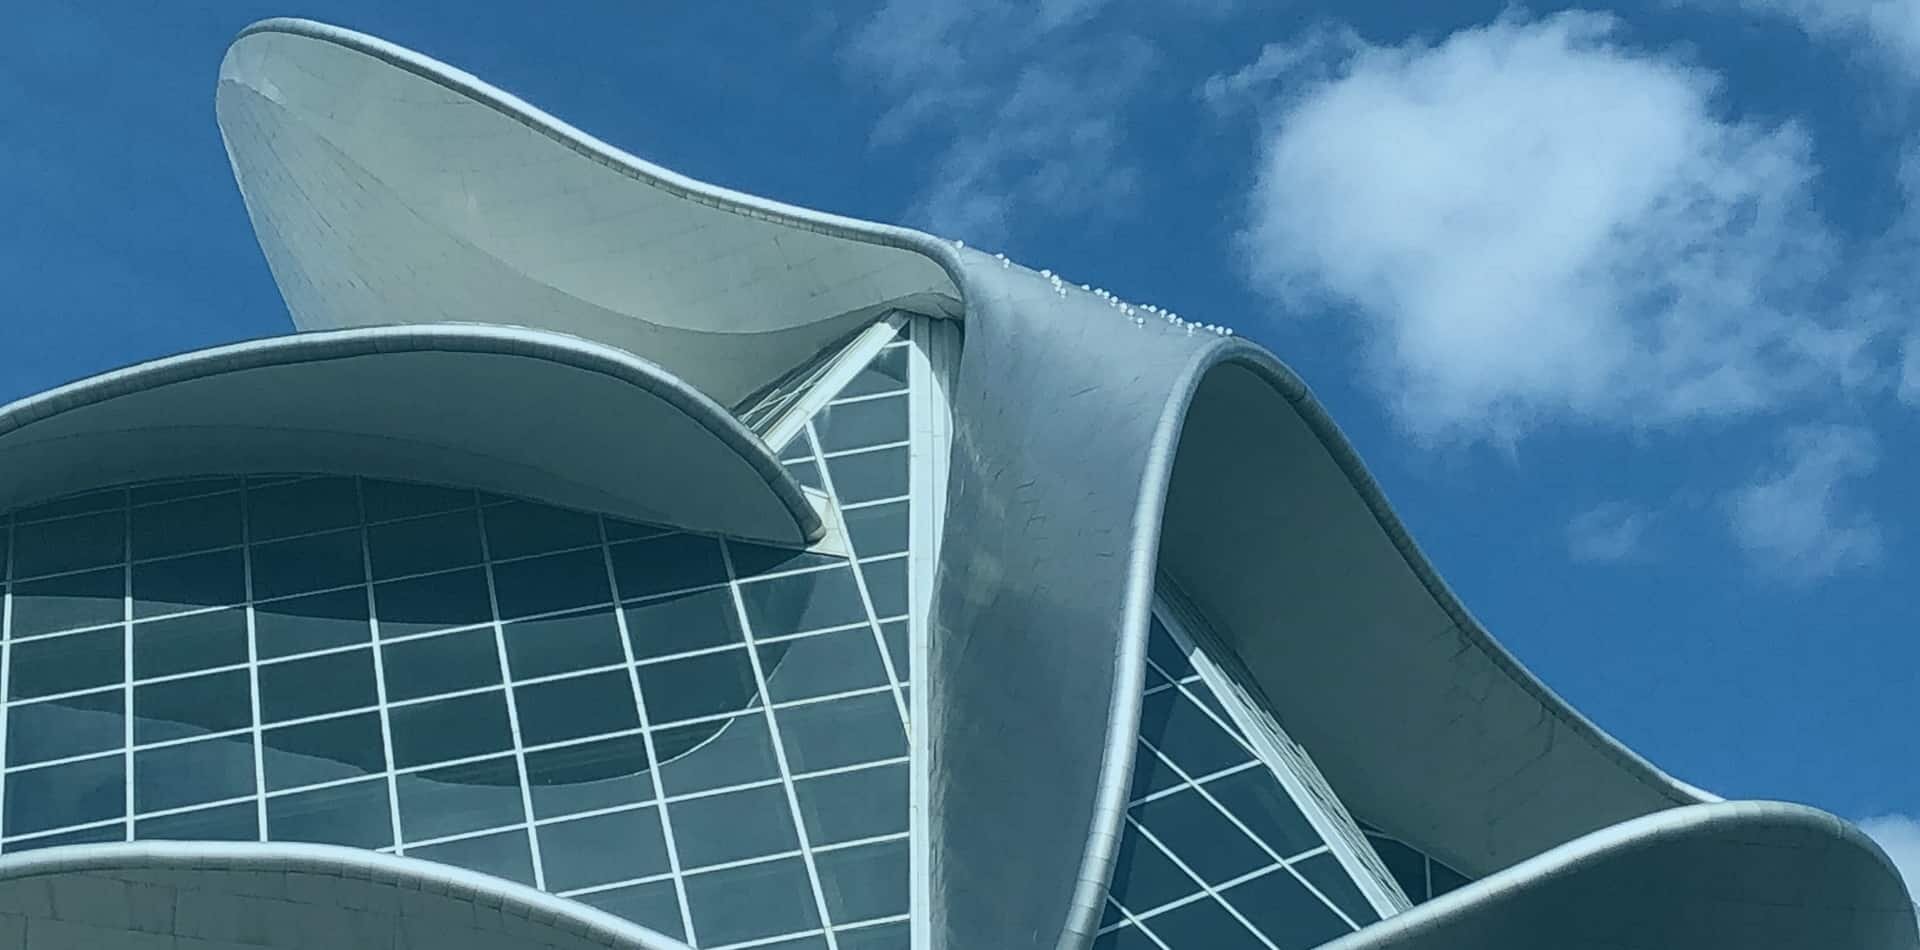 Microclimate Ice Snow Inc | Curved building